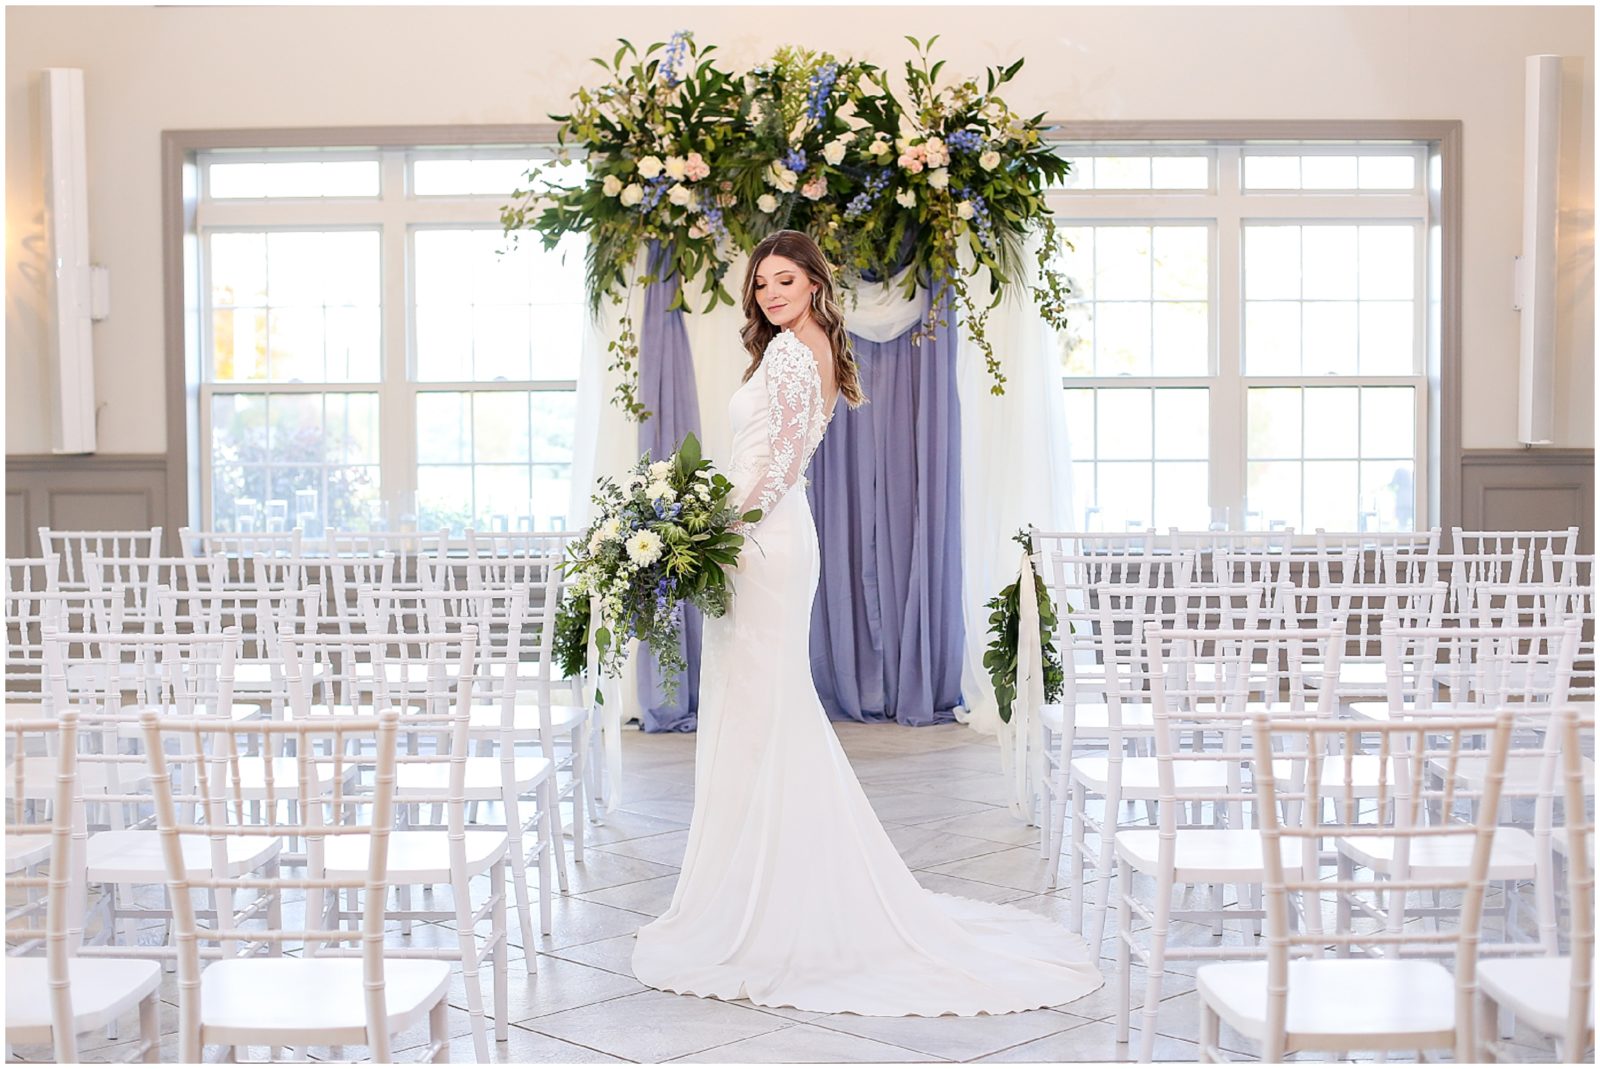 LONG SLEEVE WEDDING DRESS WITH BLUE AND WHITE FLOWERS